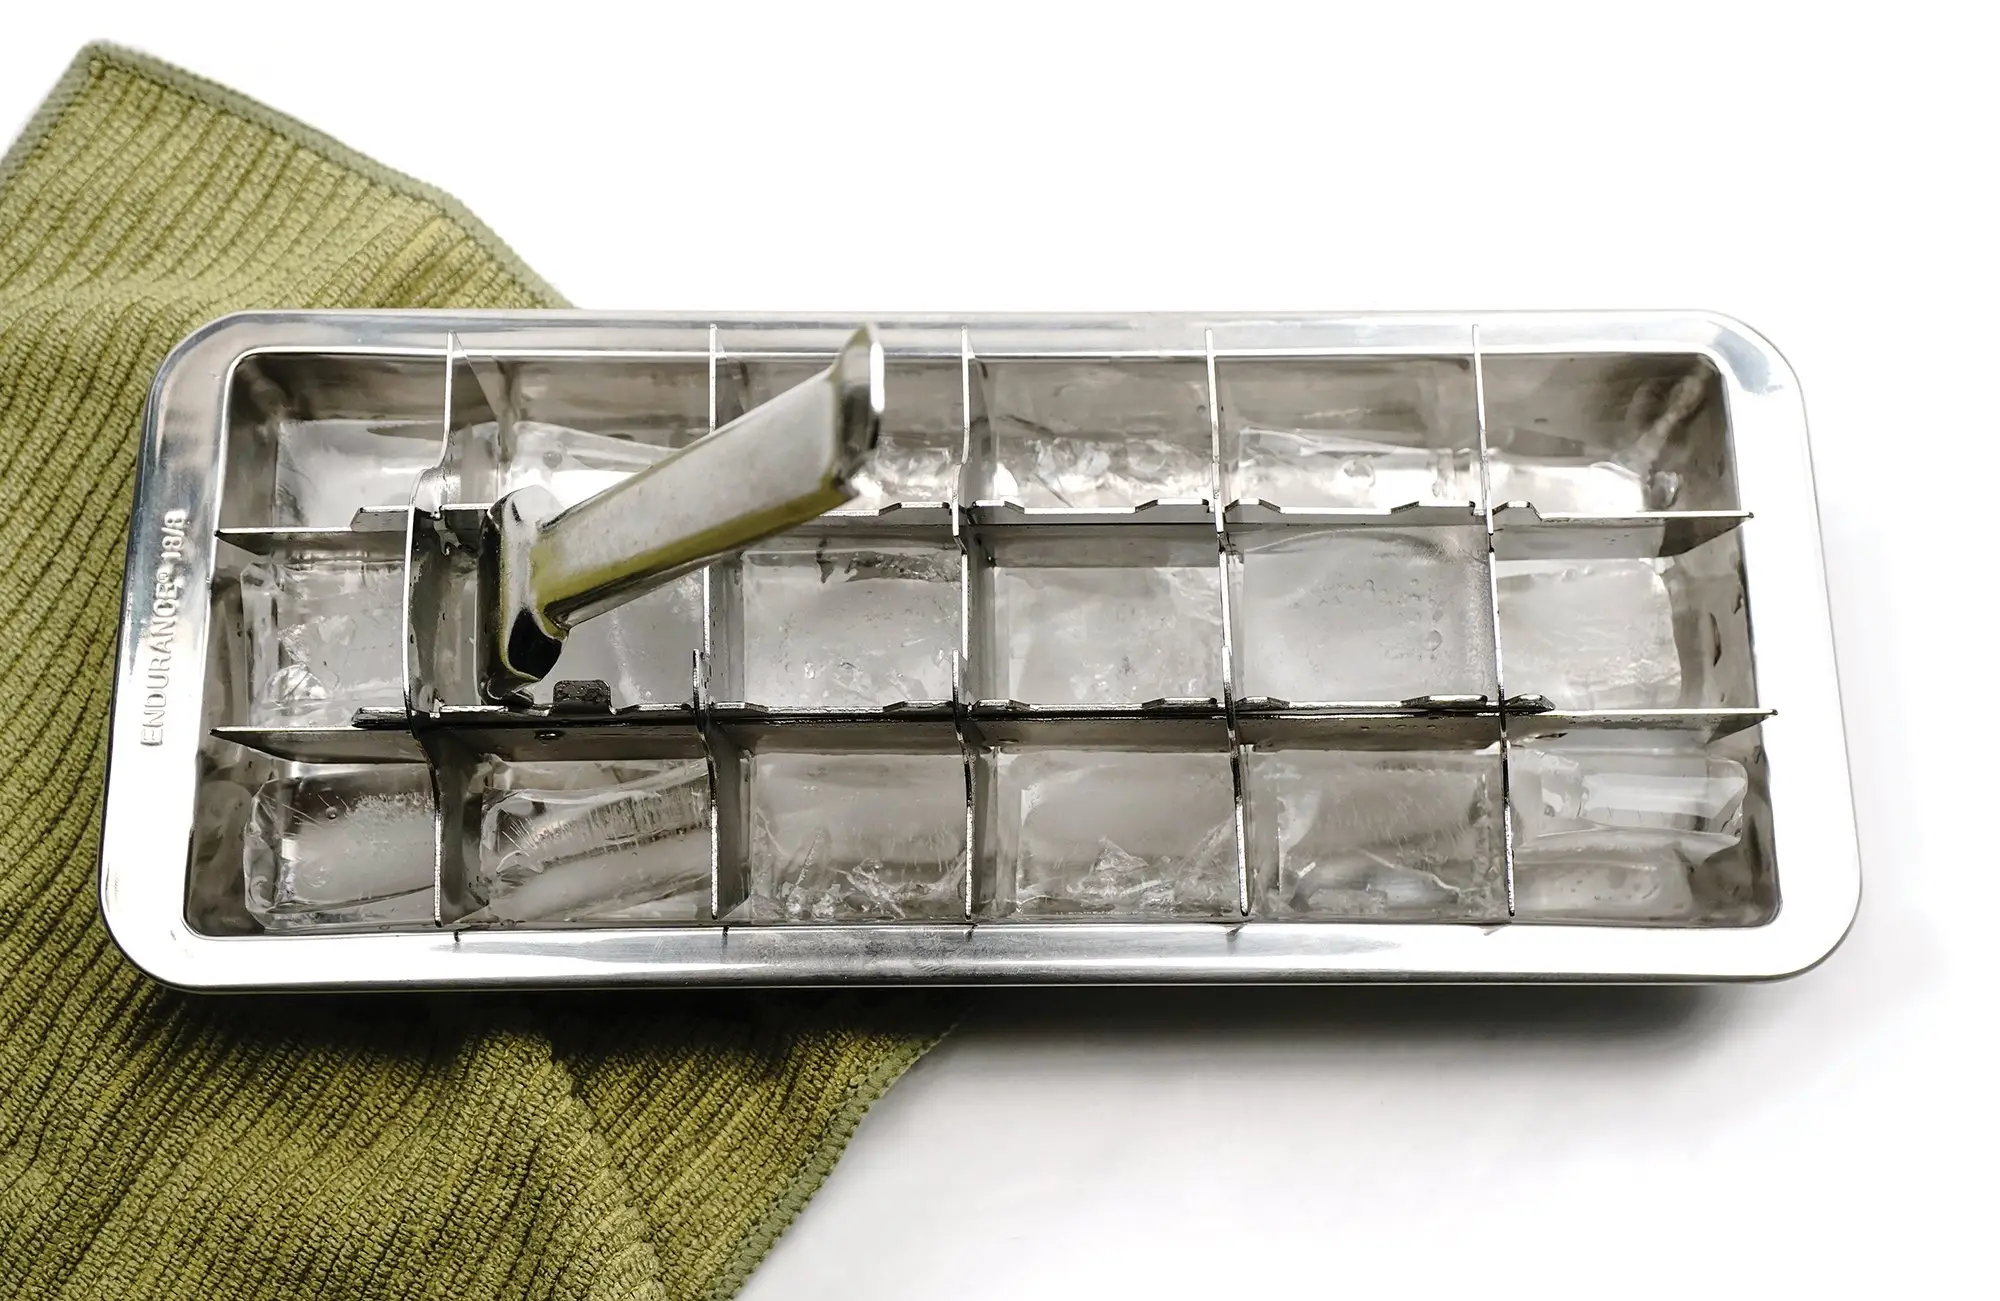 Metal Ice Cube Tray Made with Stainless Steel